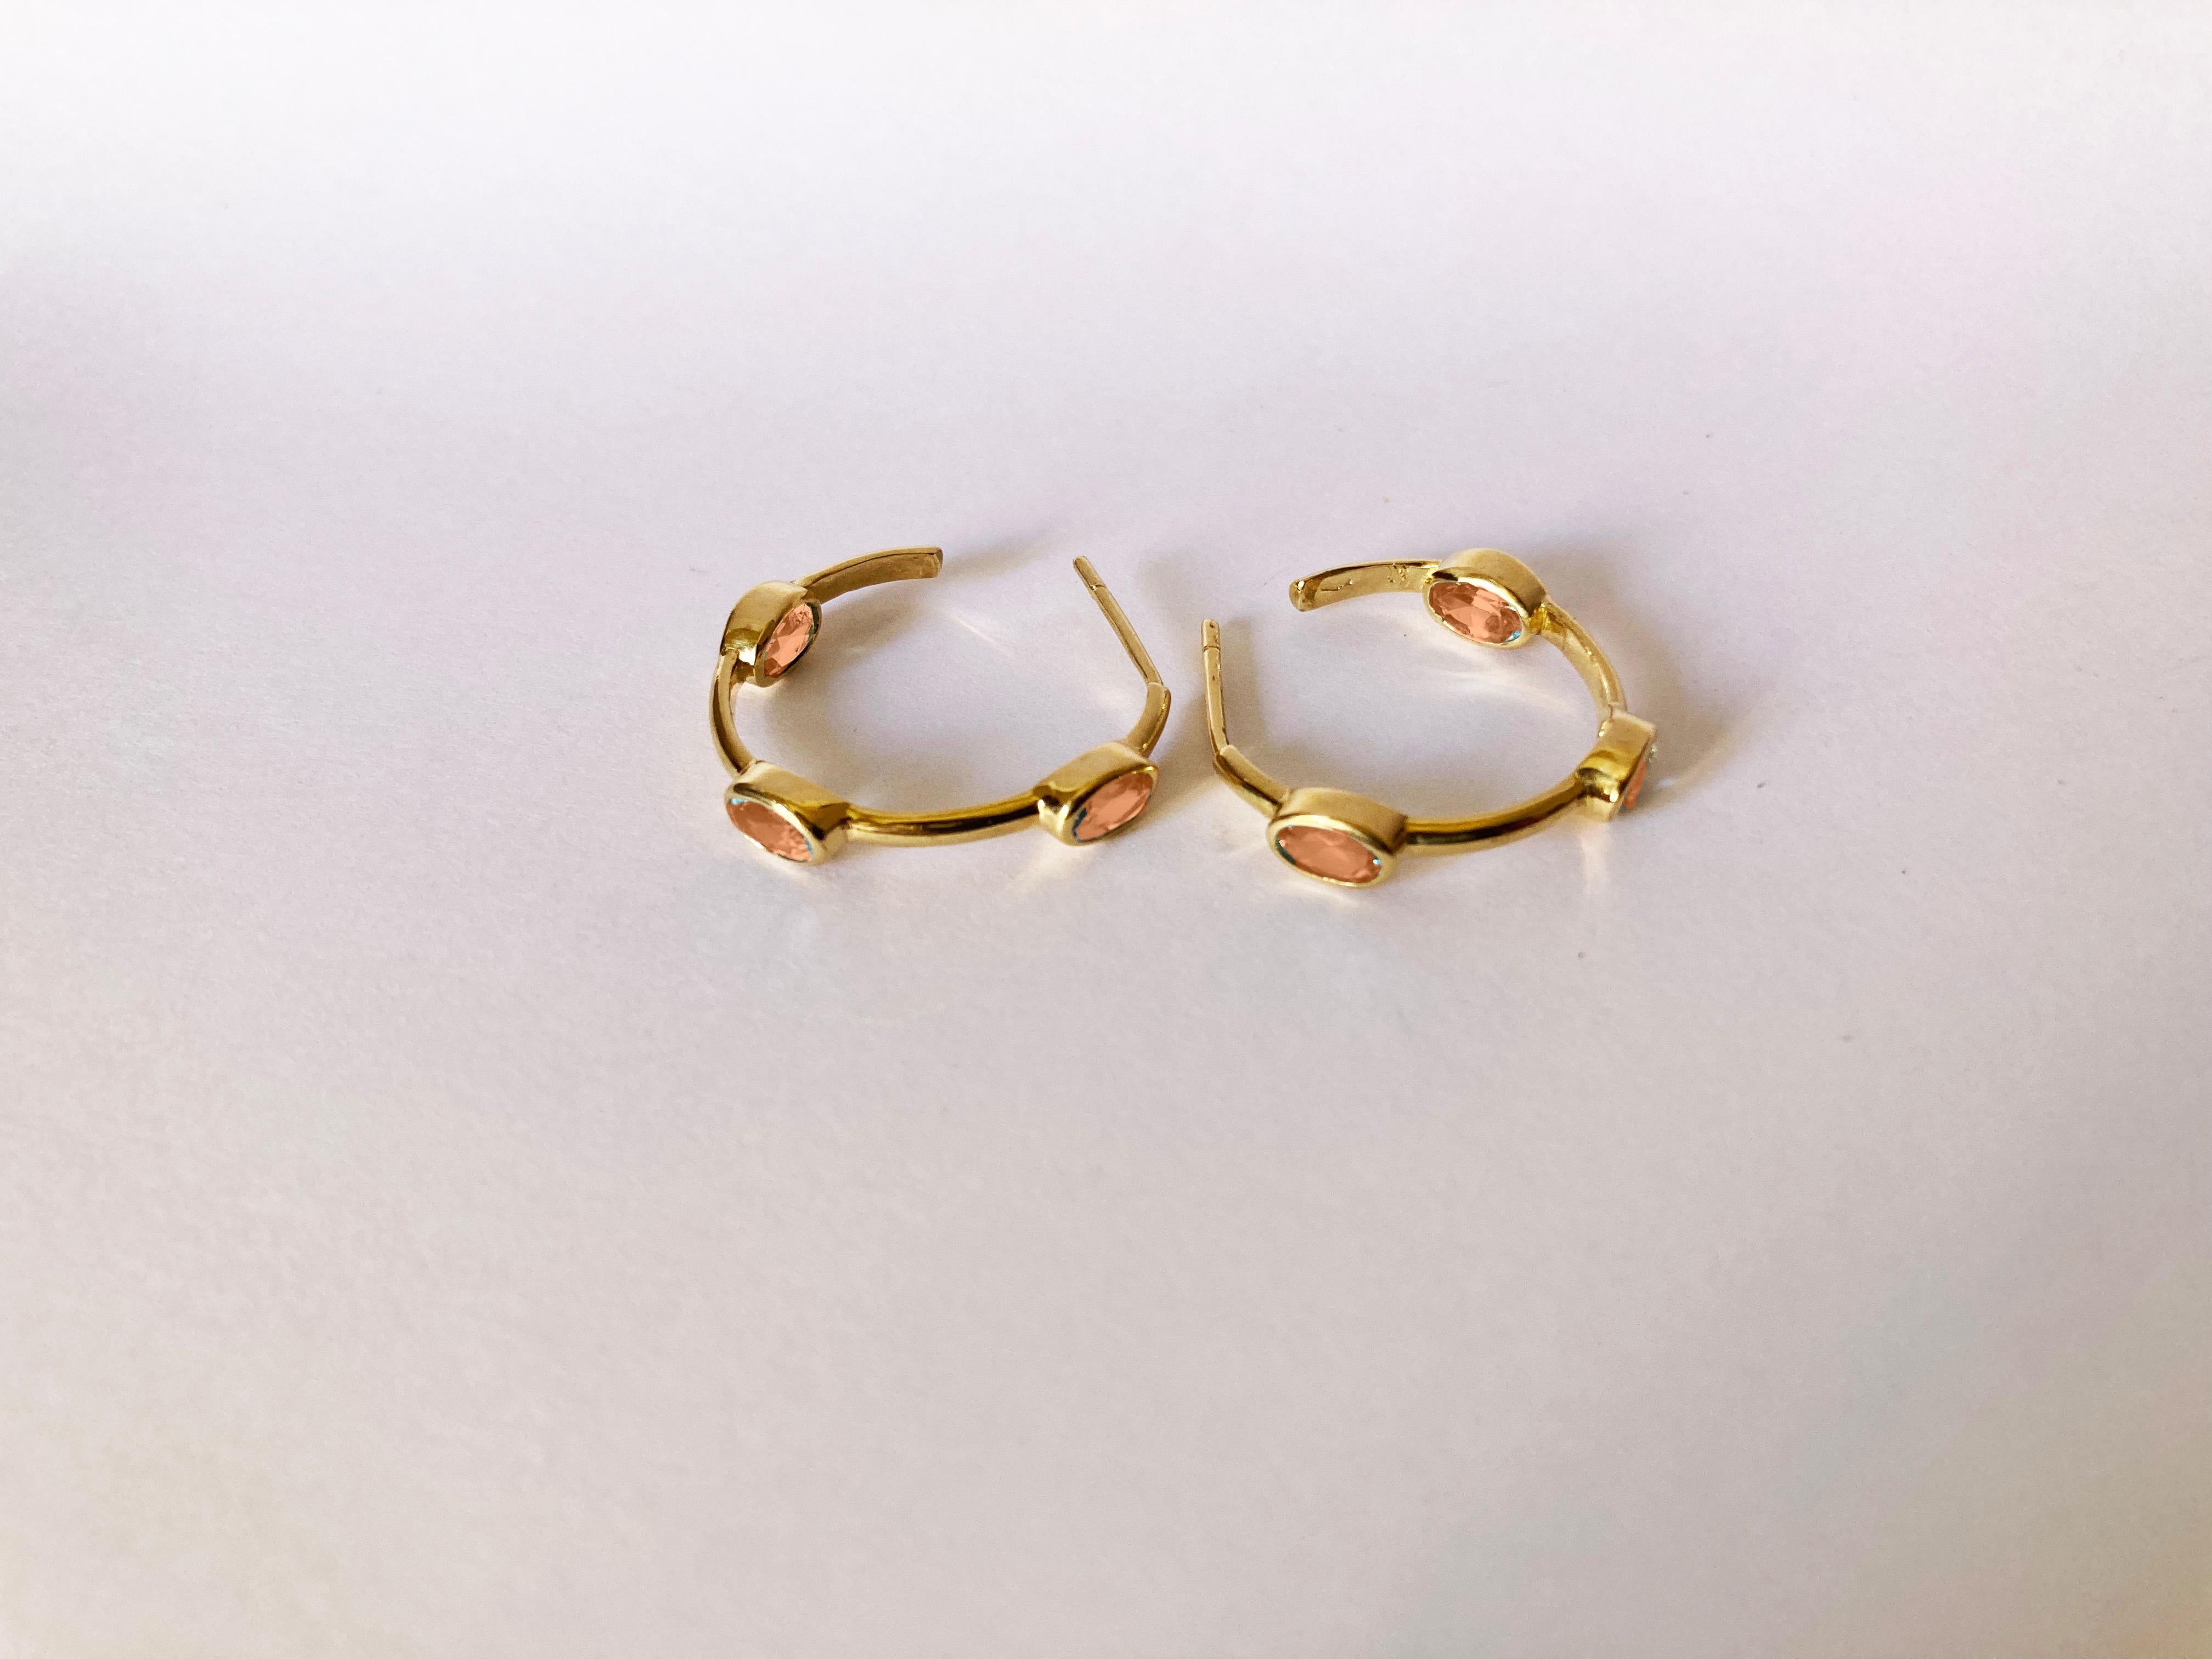 Rossella Ugolini Unisex Citrine Hoop Earrings 18K Yellow Gold Made In Italy In New Condition For Sale In Rome, IT